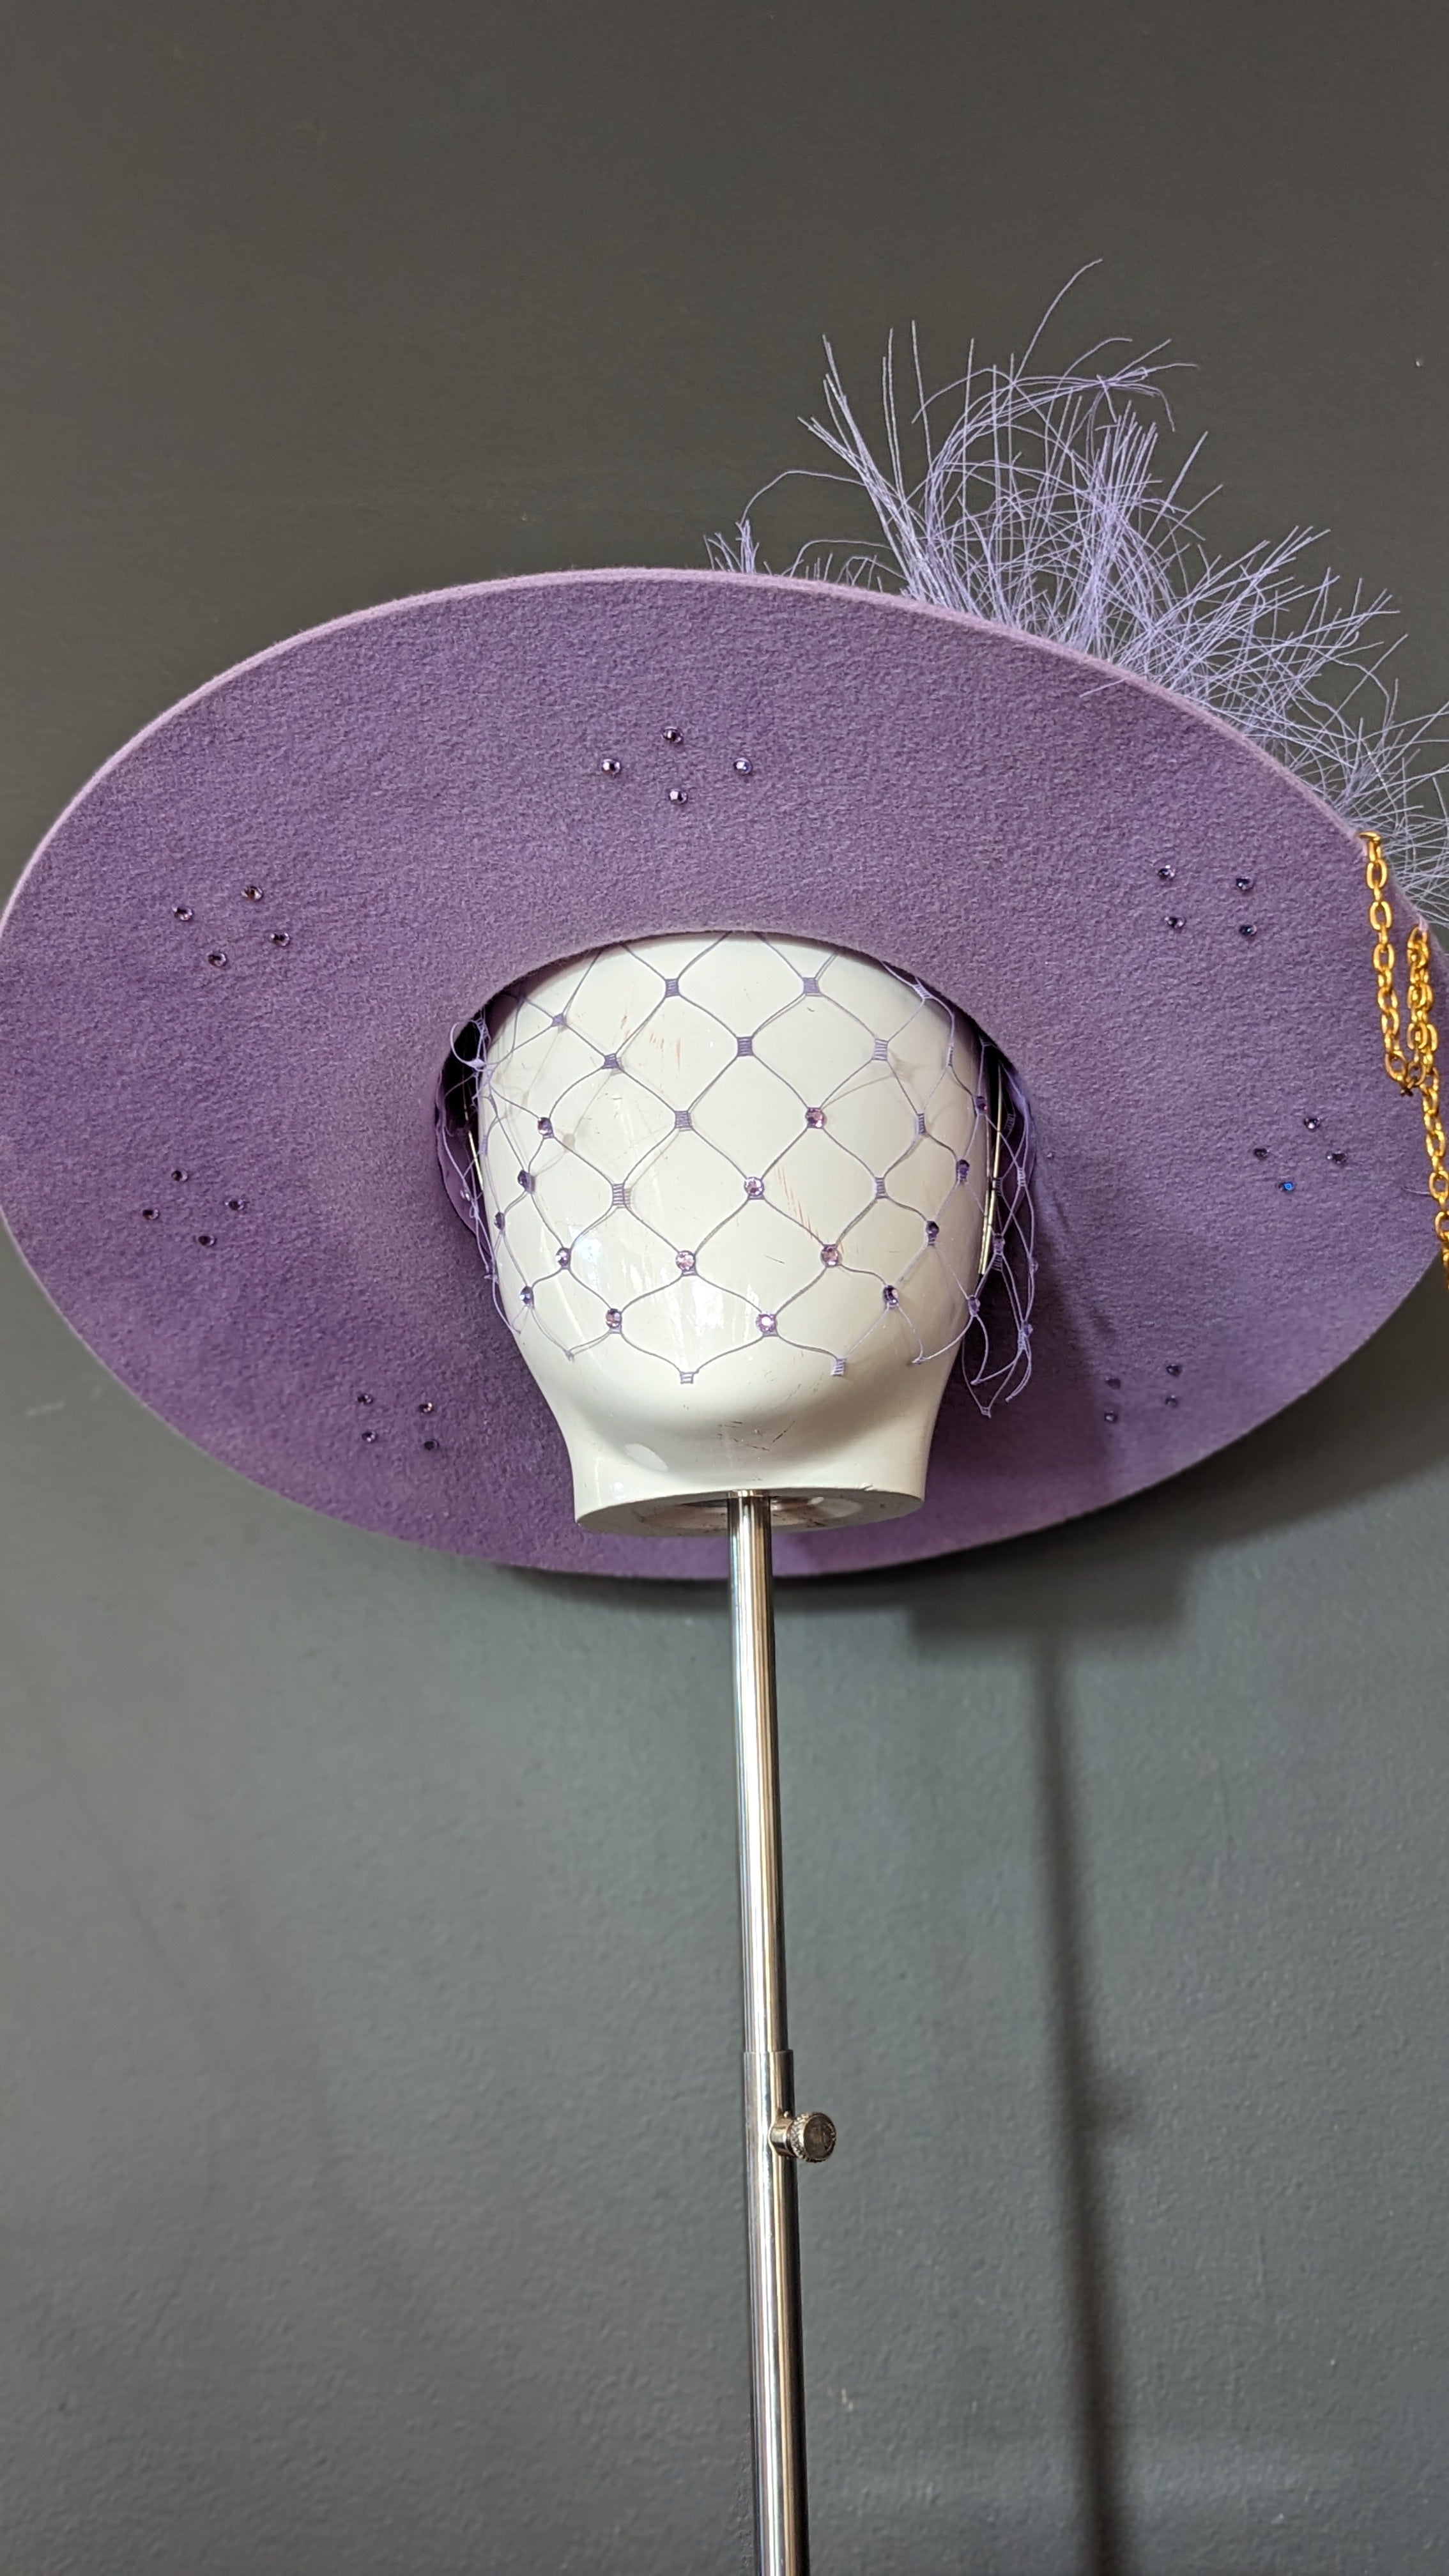 Lariat Lilac Chained Curved Cowboy Brim